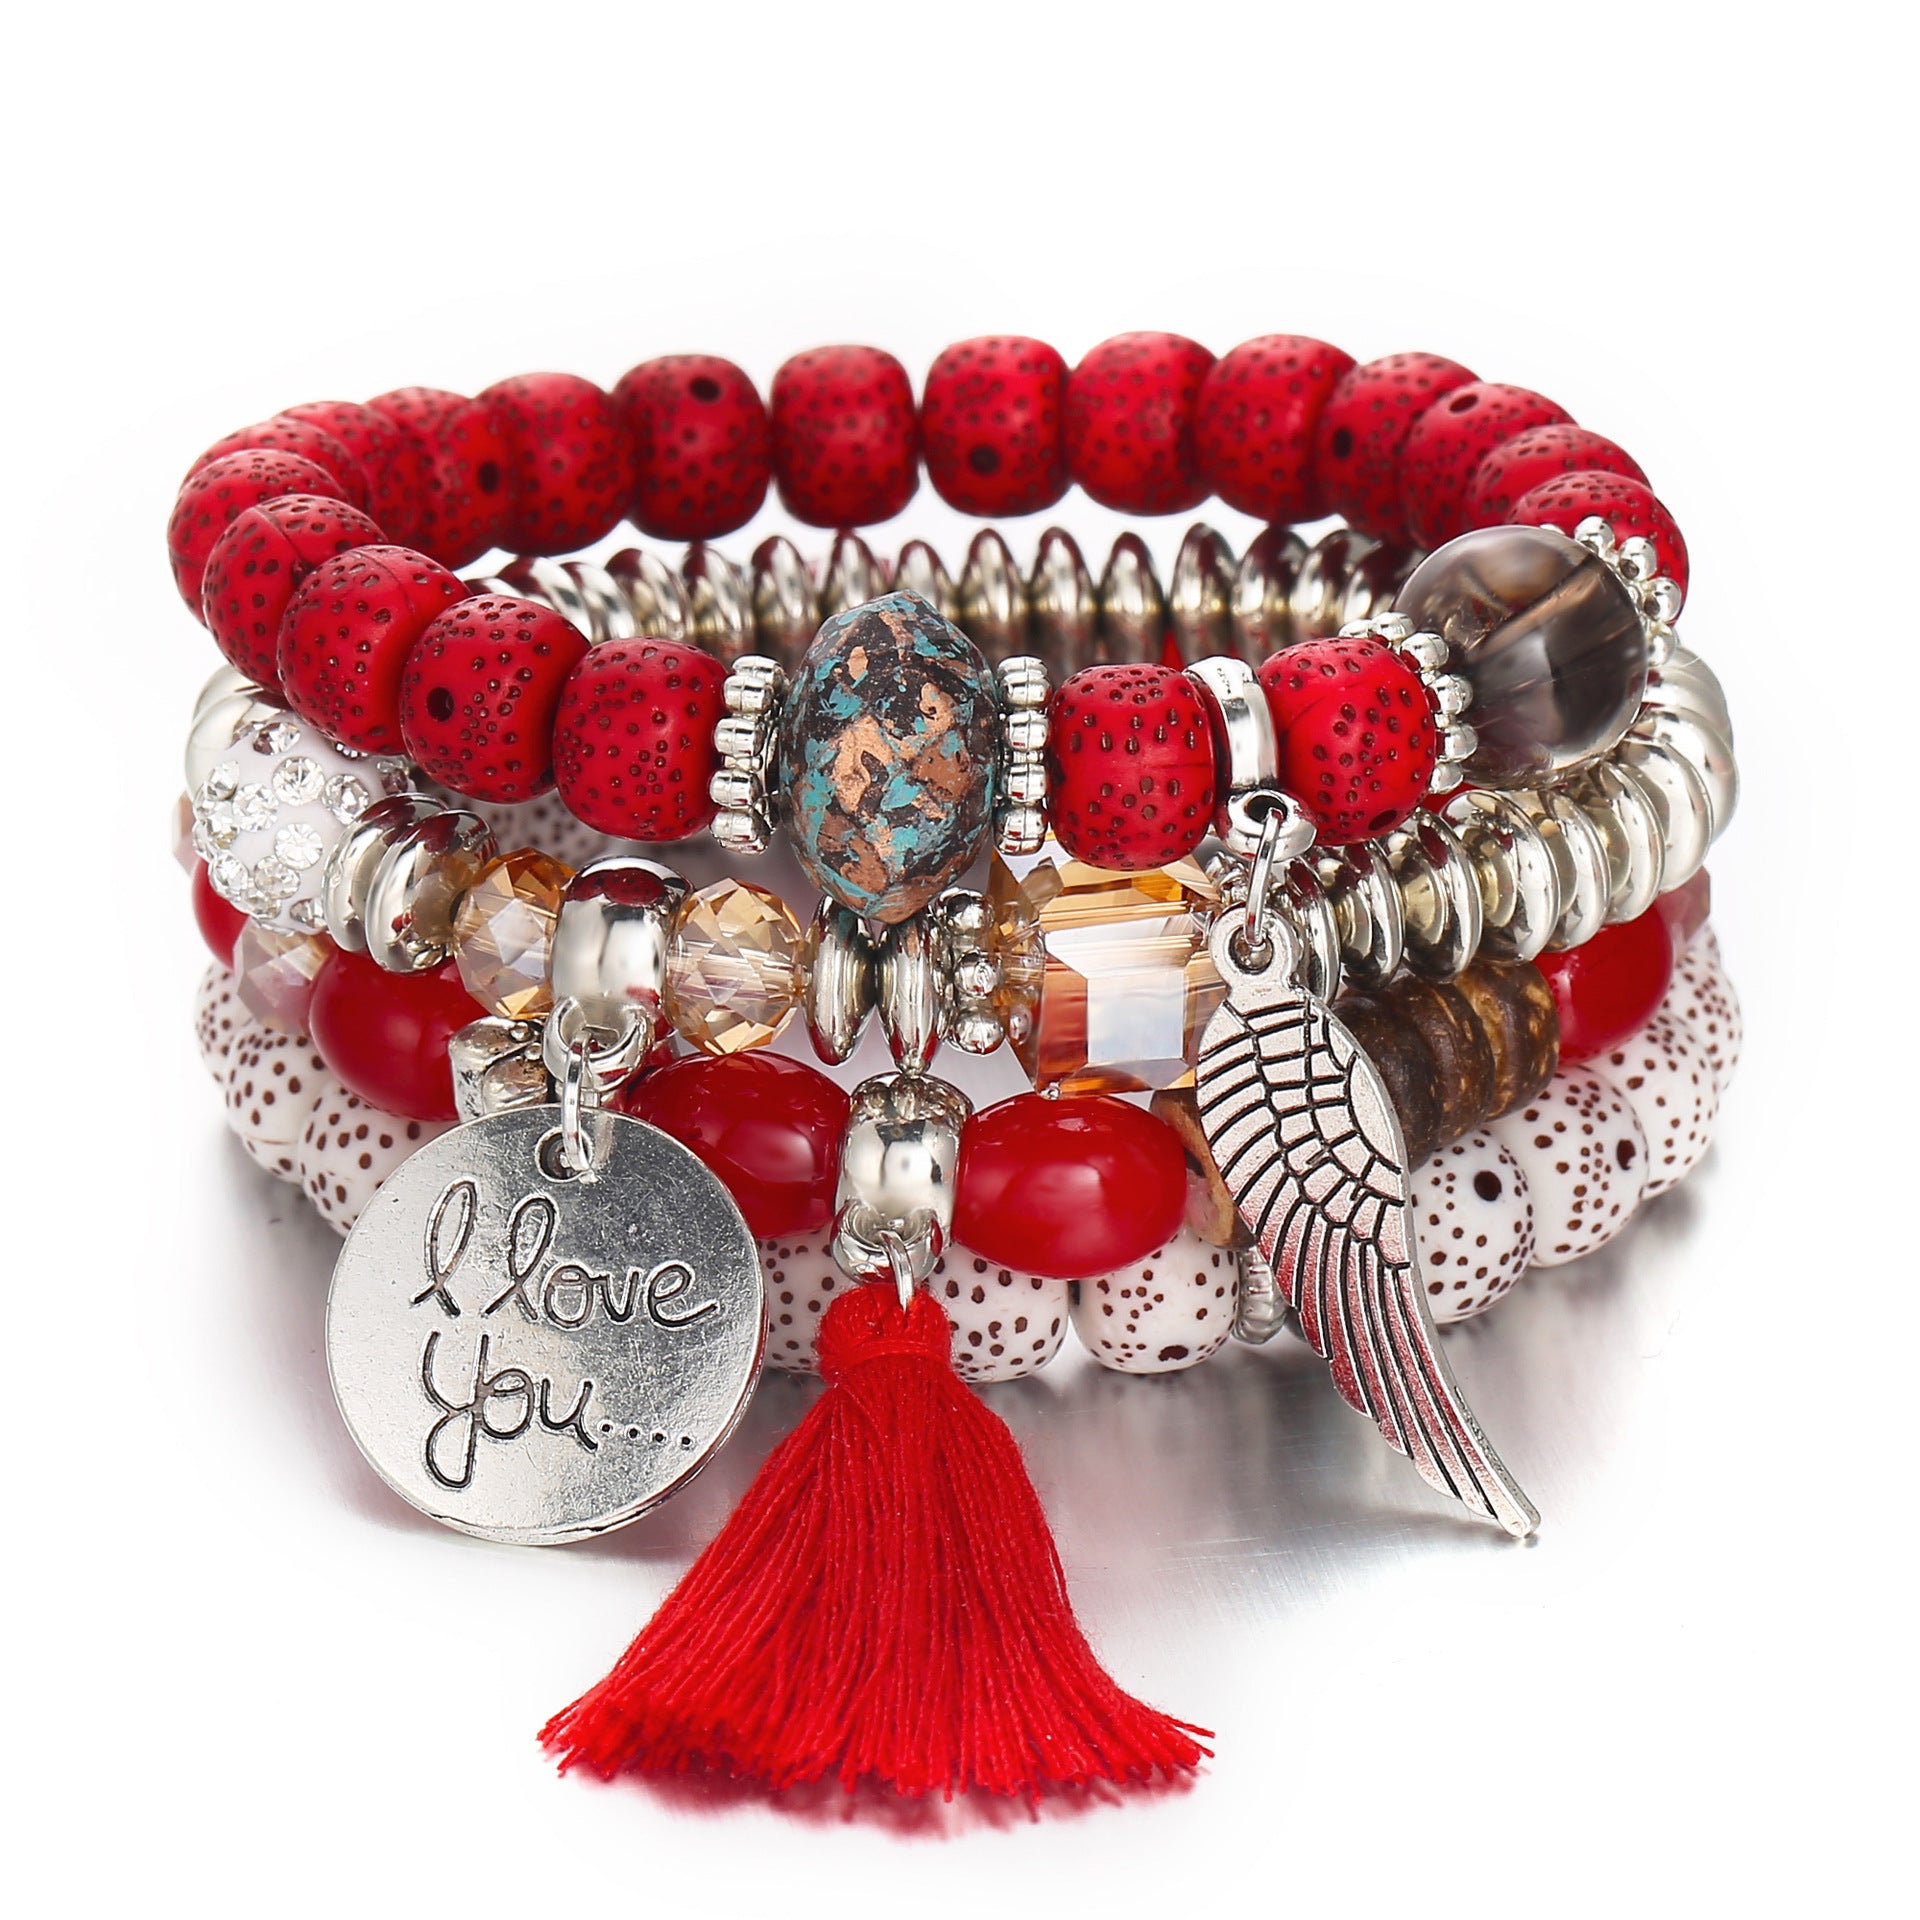 Woven Beads Chain Leather Cuff Bracelet w/ I Love You Pendant - Red